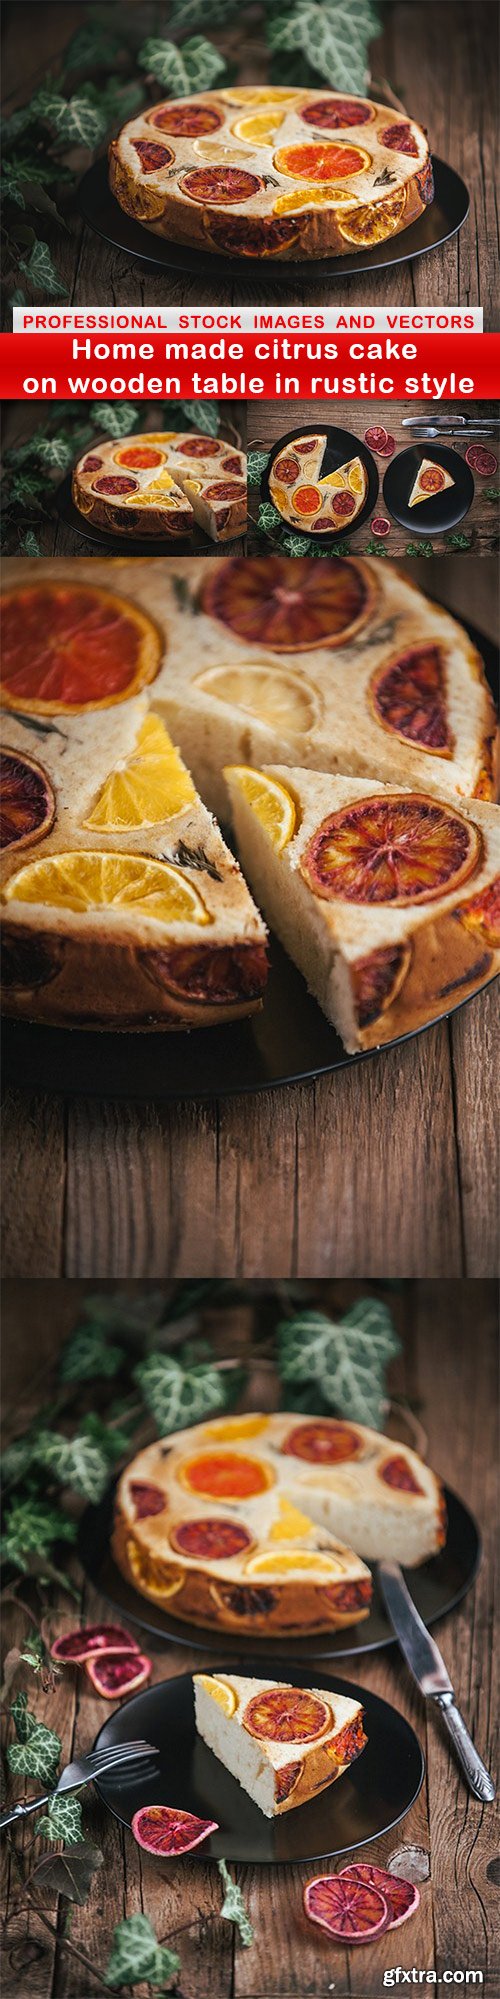 Home made citrus cake on wooden table in rustic style - 5 UHQ JPEG